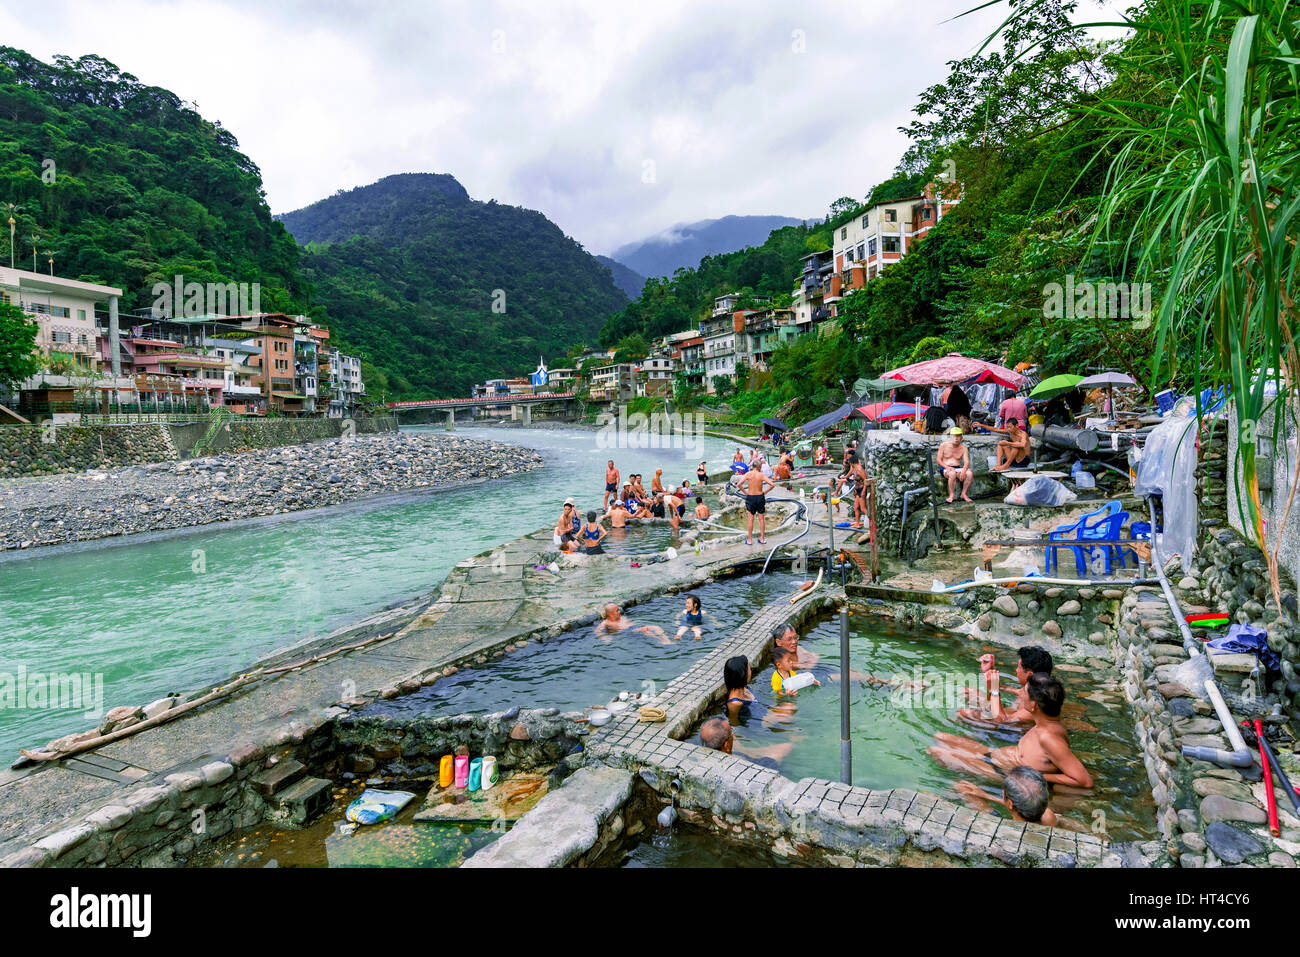 TAIPEI, TAIWAN - NOVEMBER 29: This is is a view of public hot spring baths in Wulai village on November 29, 2016 in Taipei Stock Photo